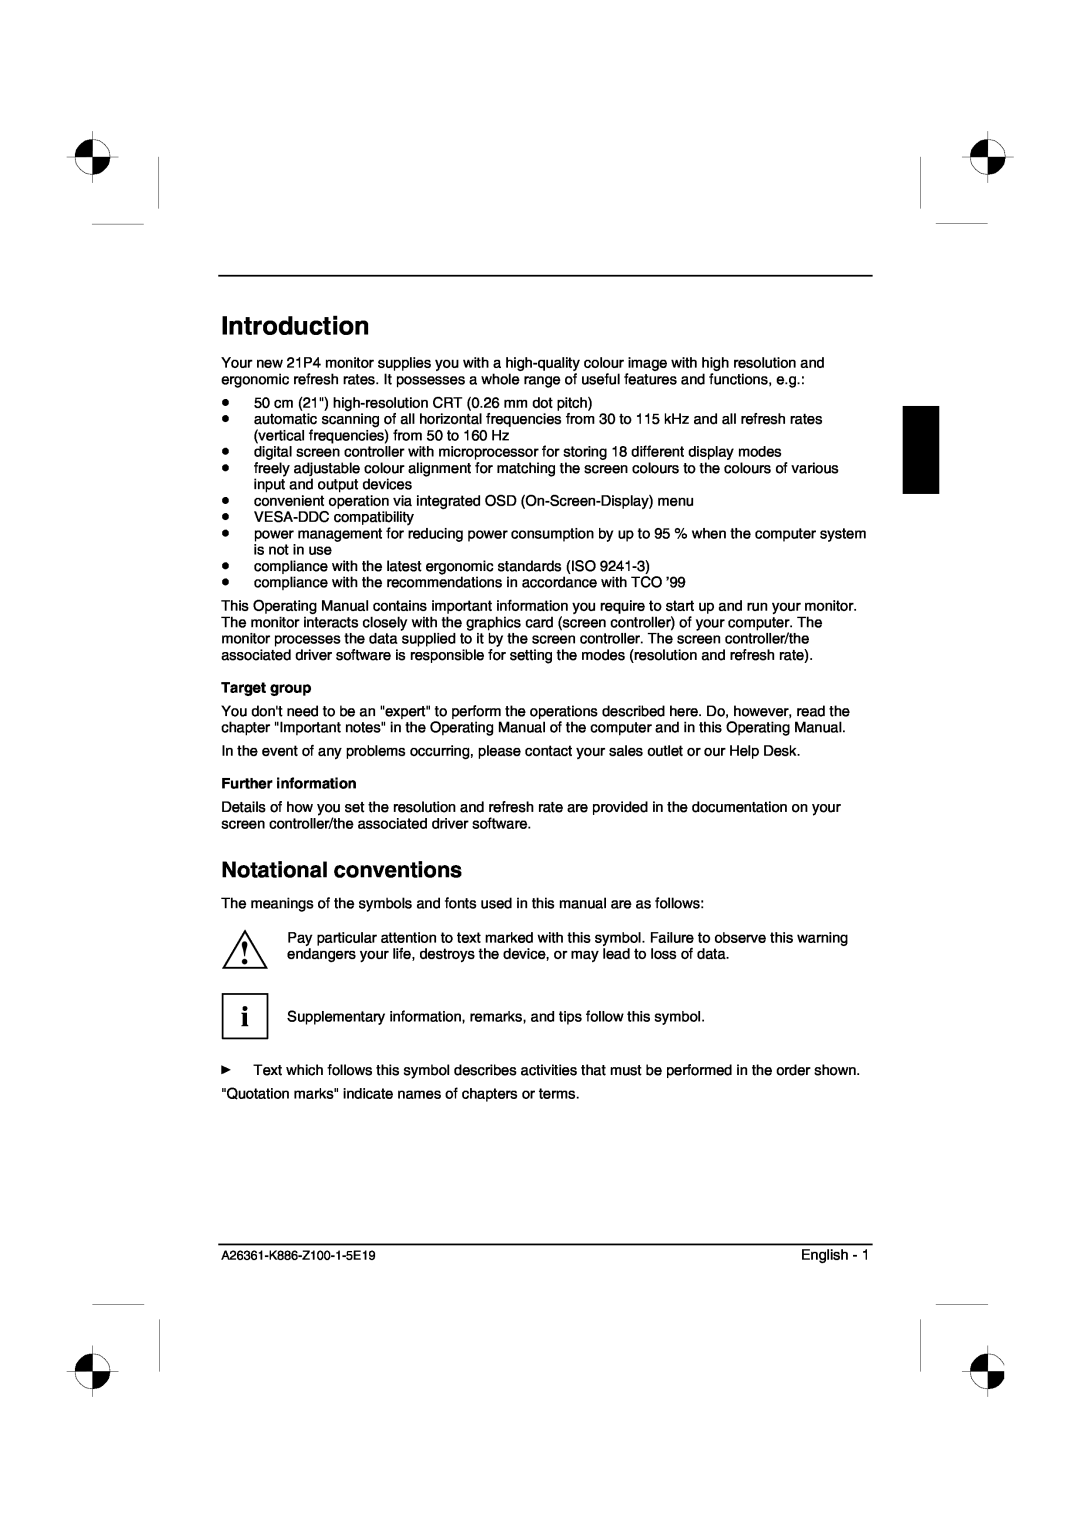 Fujitsu Siemens Computers 21P4 manual Introduction, Notational conventions, Target group, Further information 